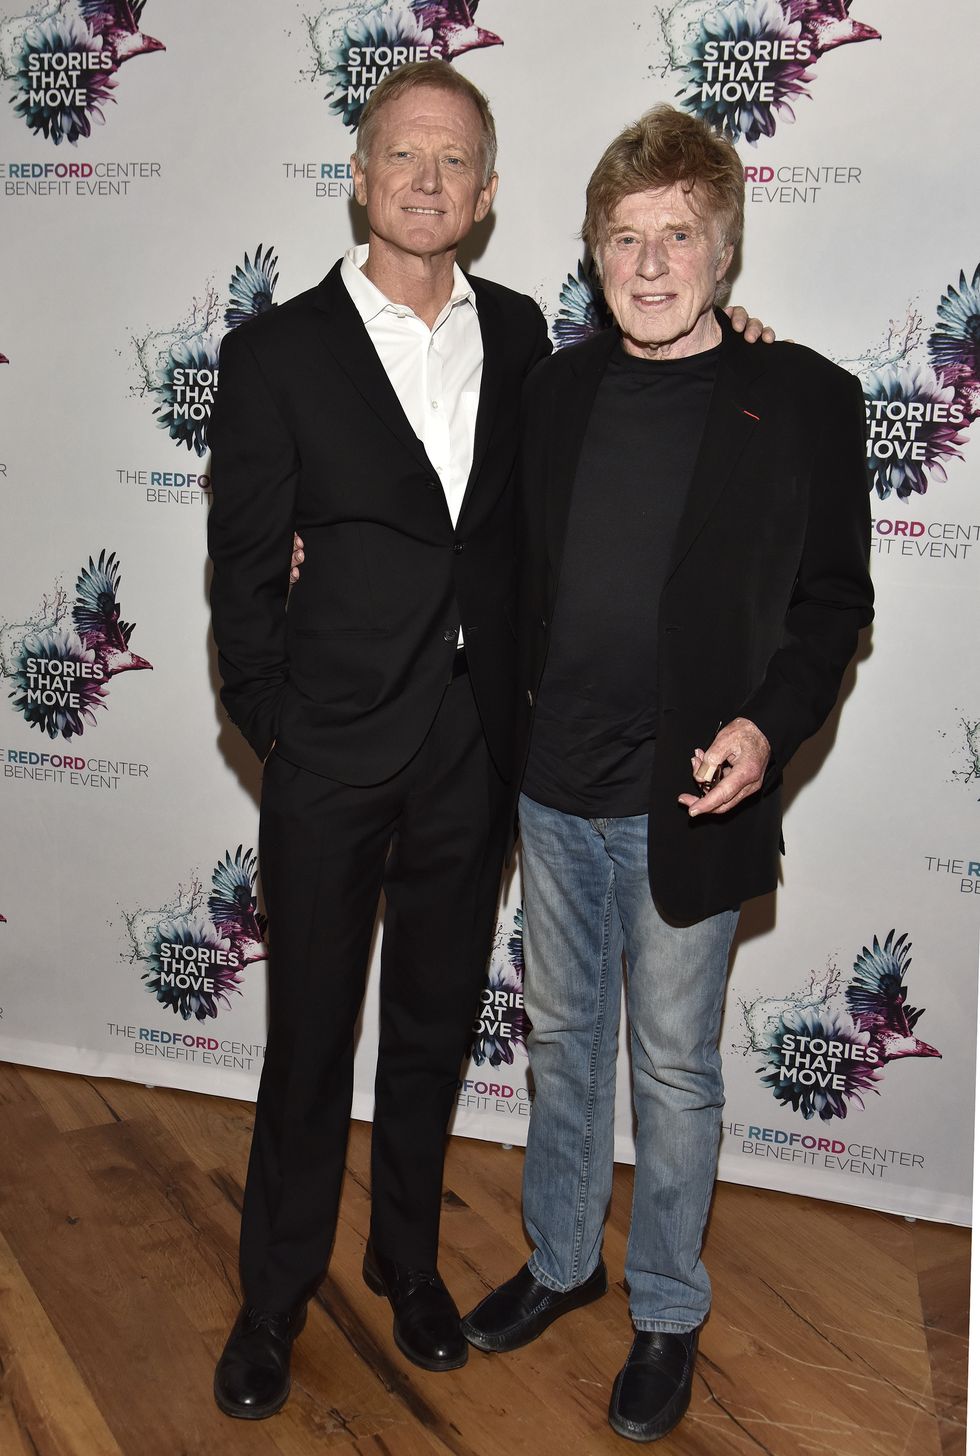 san francisco, ca   december 06  james redford l and robert redford attend the redford centers benefit at august hall on december 6, 2018 in san francisco, california  photo by tim mosenfeldergetty images